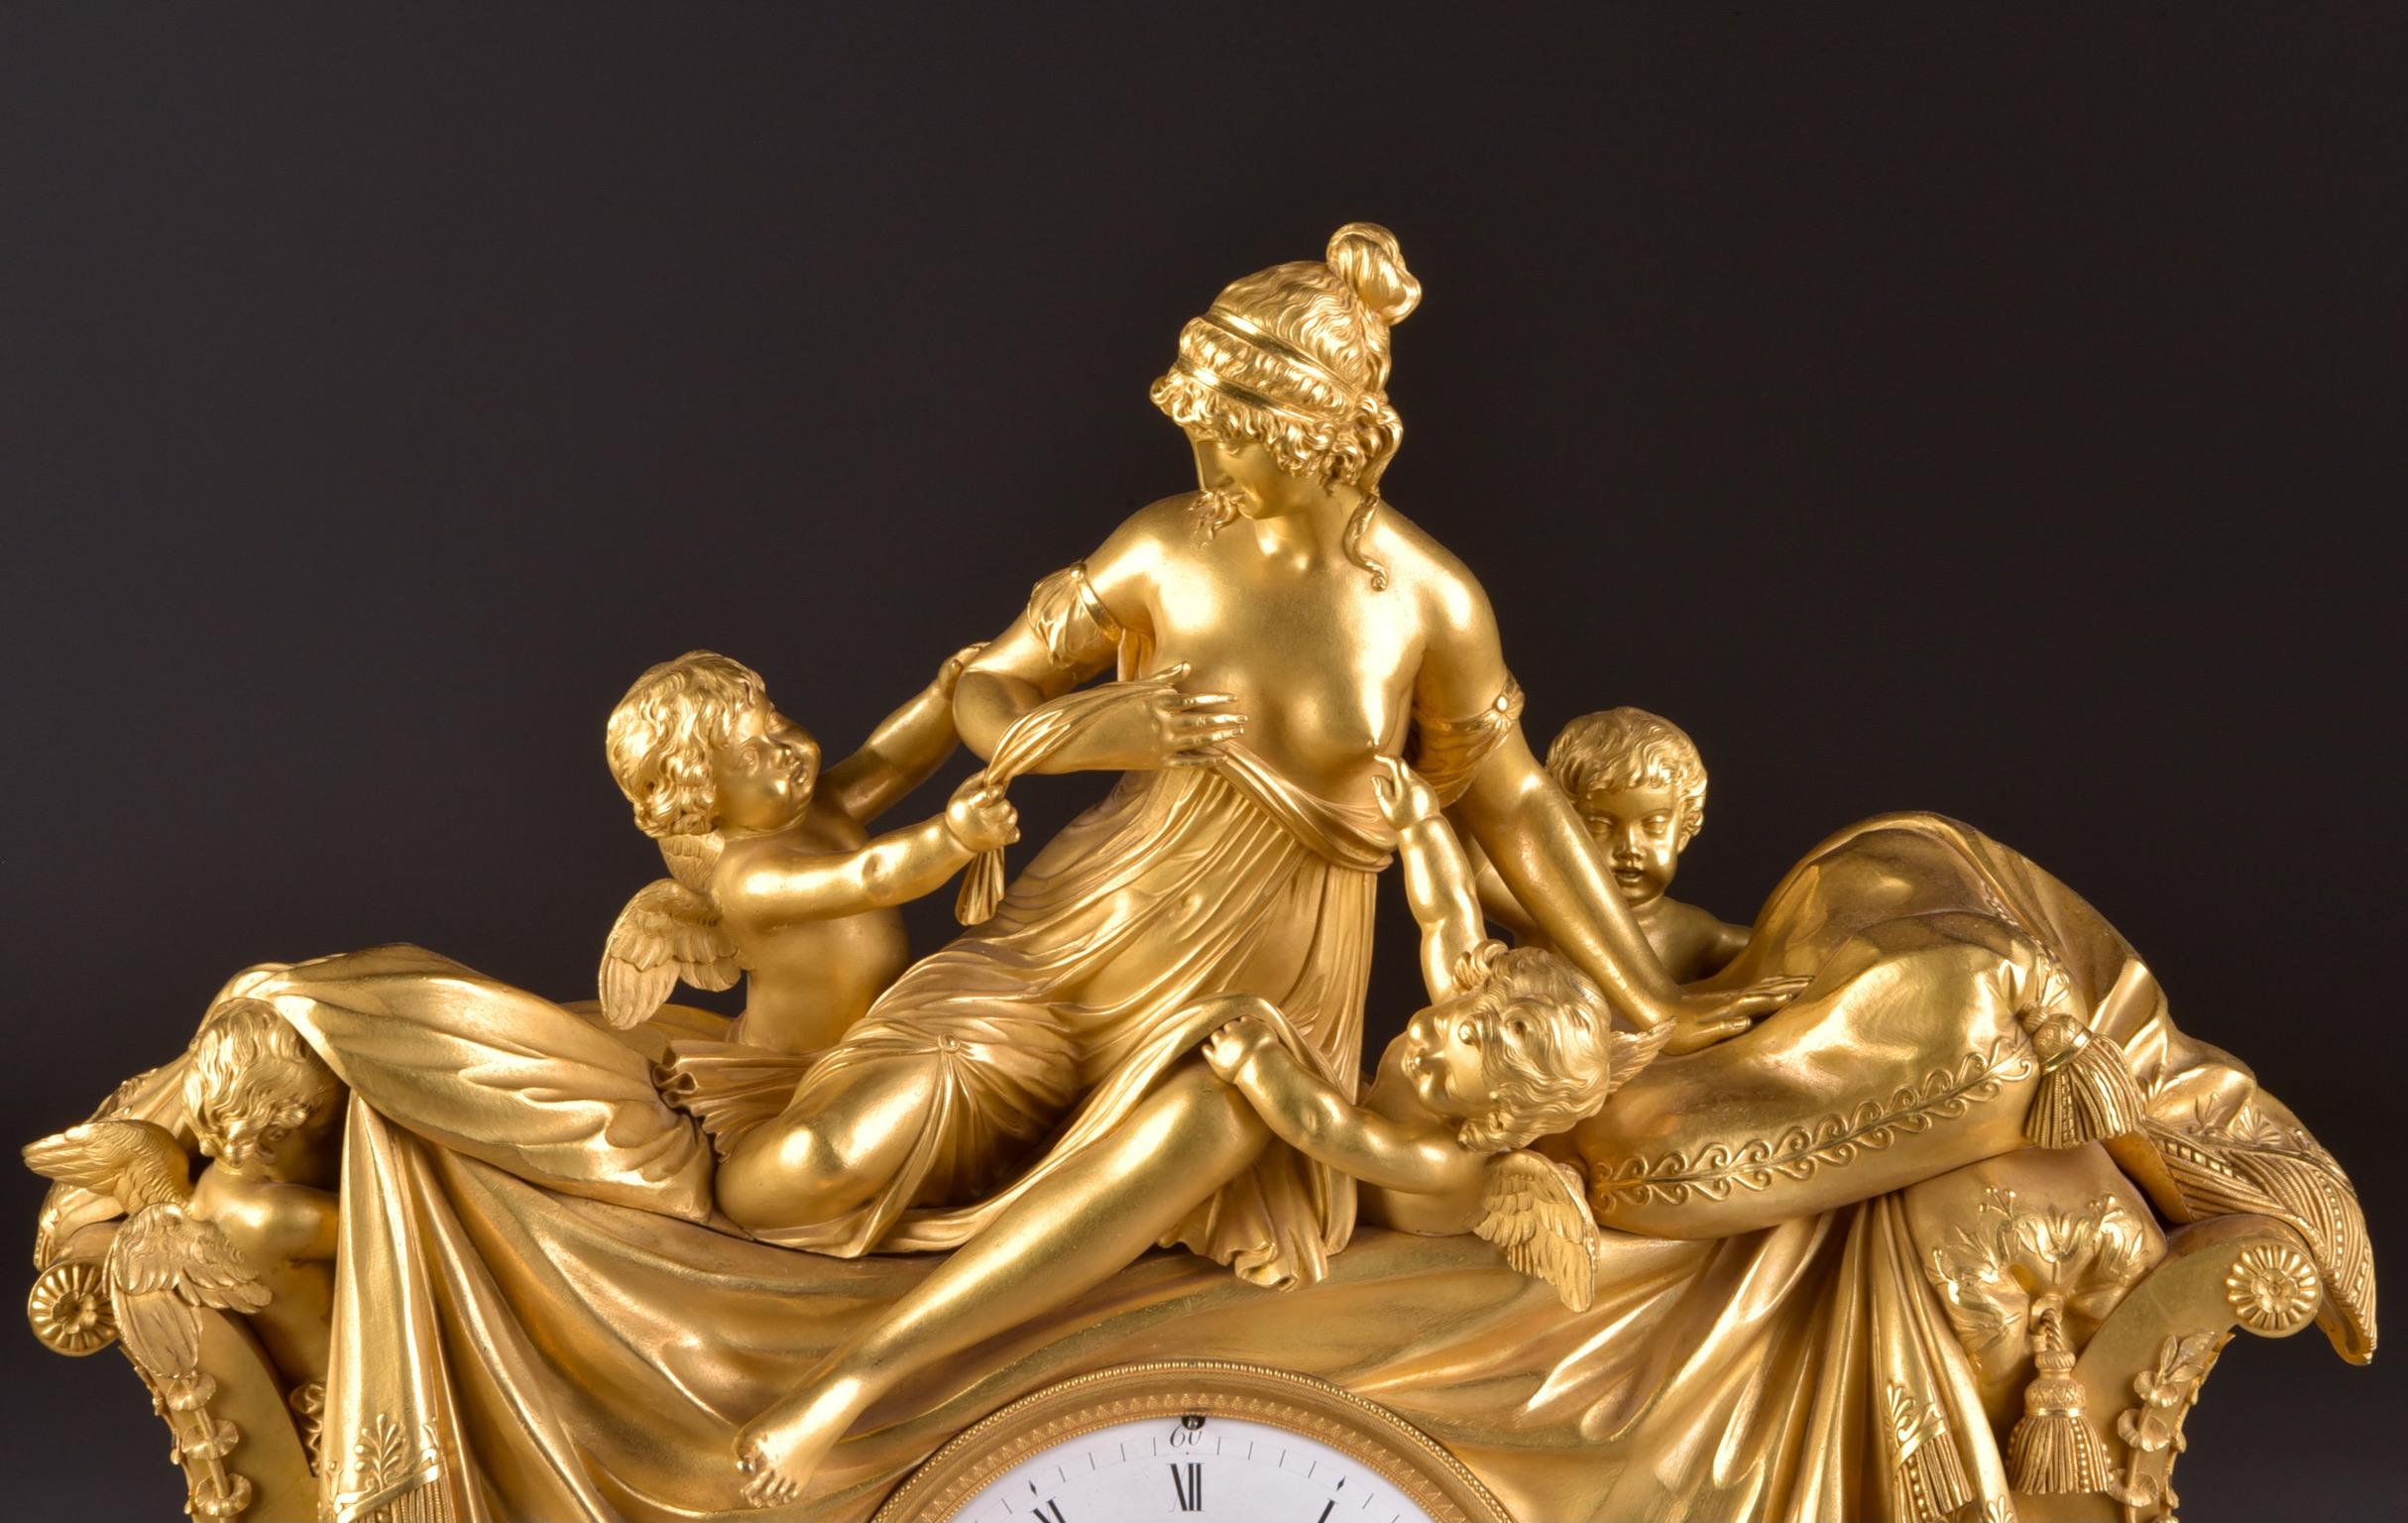 Exceptional beautiful rare large French attributed to Claude Galle (1759-1816), high quality bronze fire-gilded Empire mantel clock with a beautiful image of a beautiful woman on a sofa covered with curtains and with 4 children playing (putti)